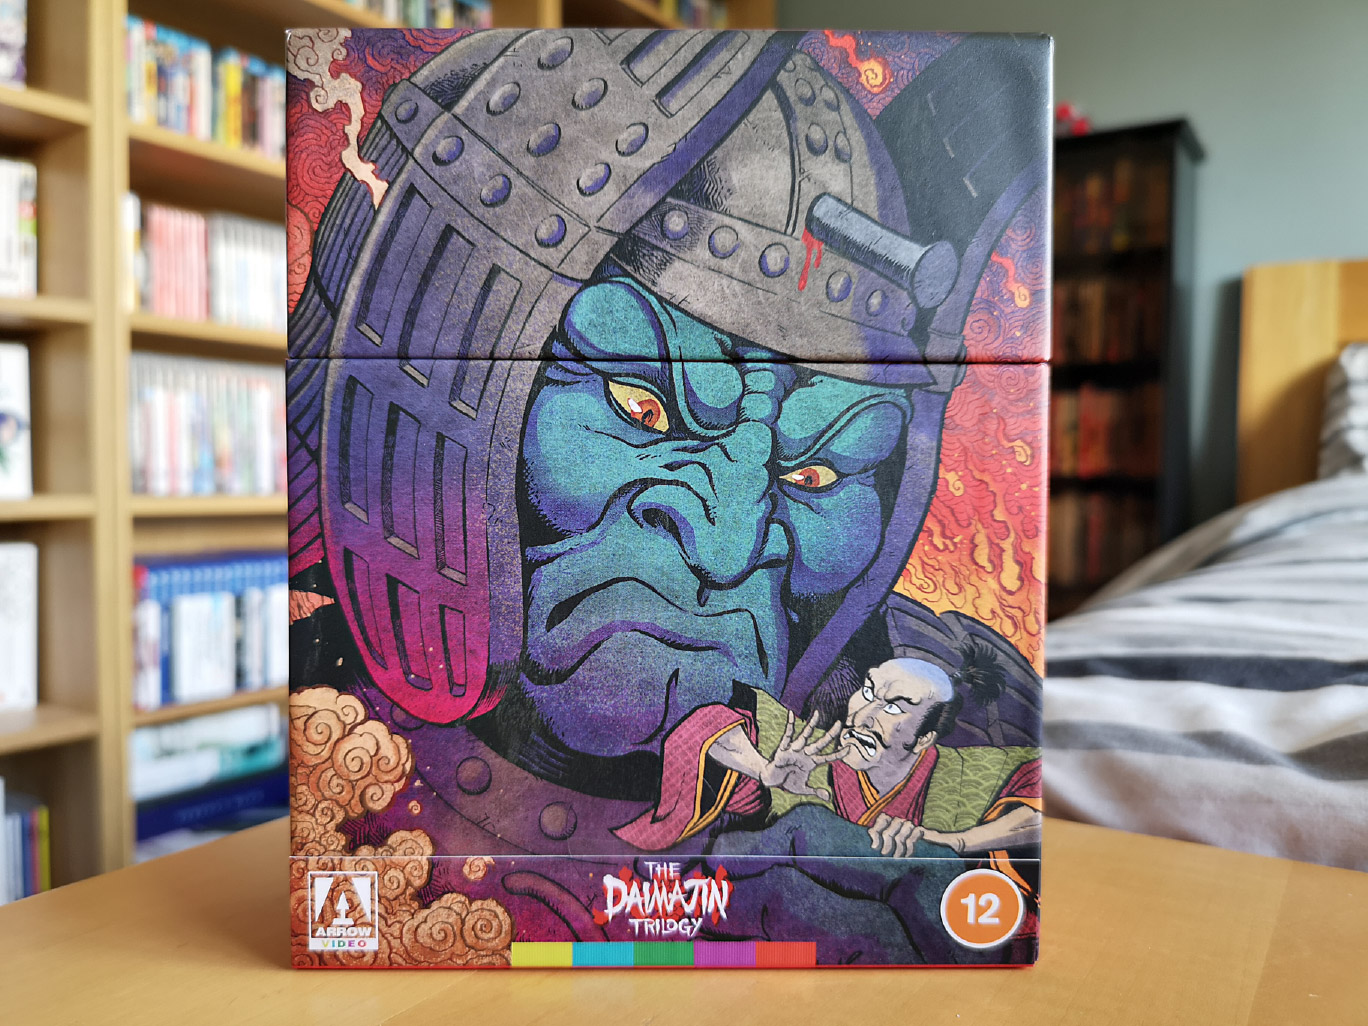 The Daimajin Trilogy (Limited Edition Blu-ray) Unboxing – The